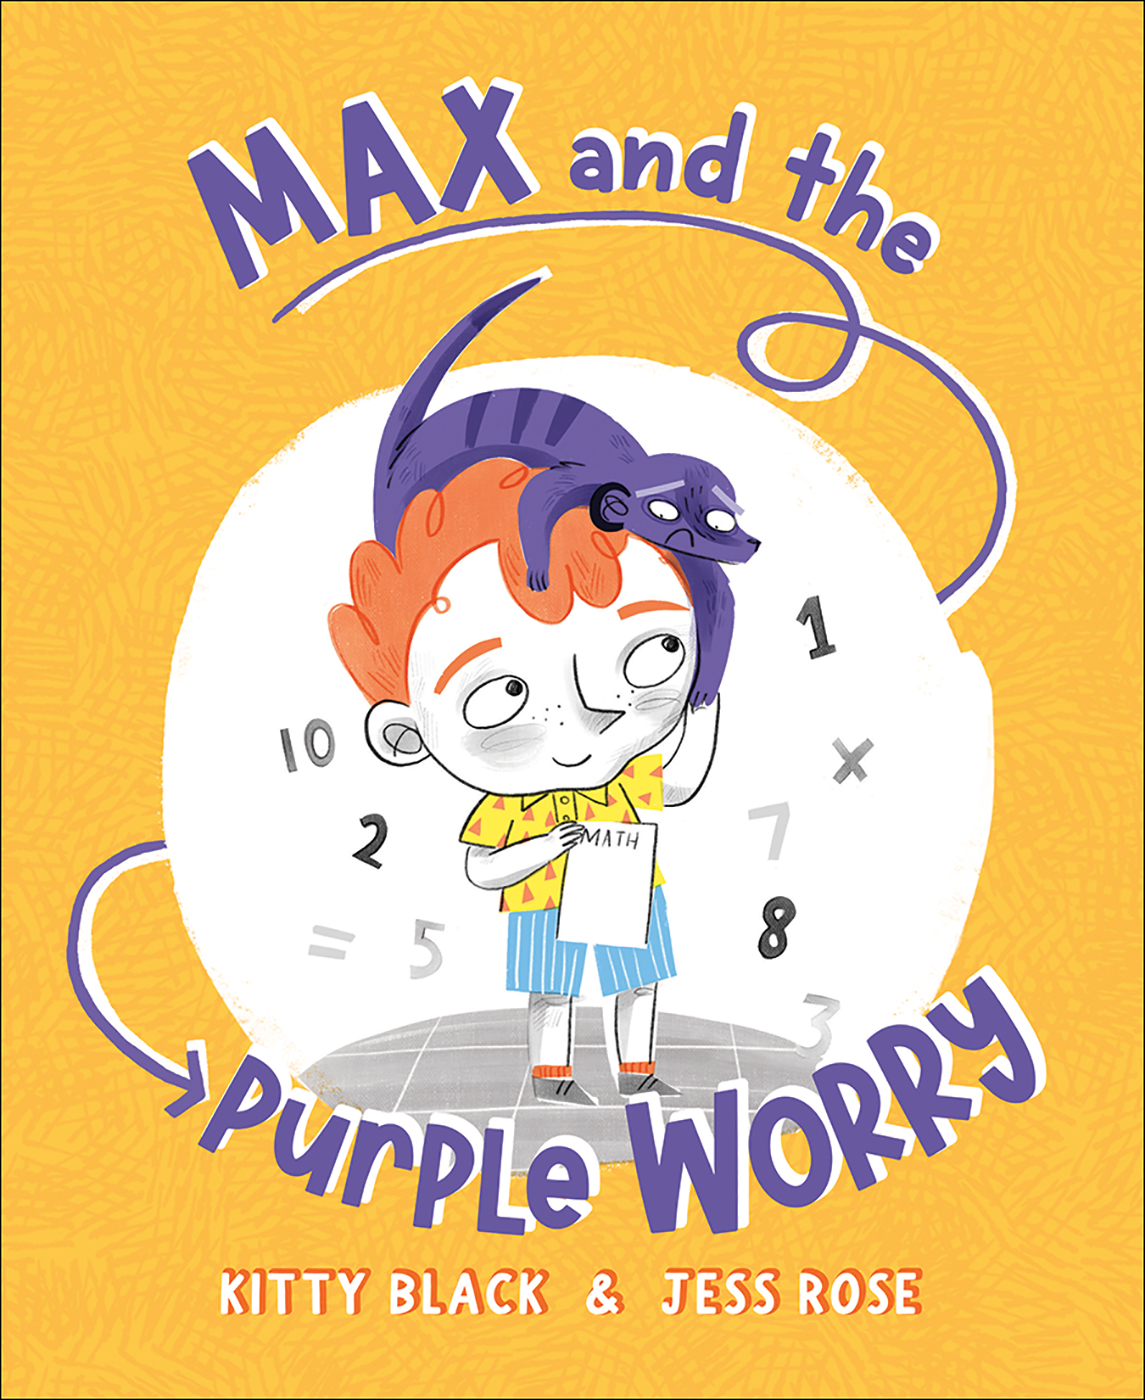 Max and the Purple Worry